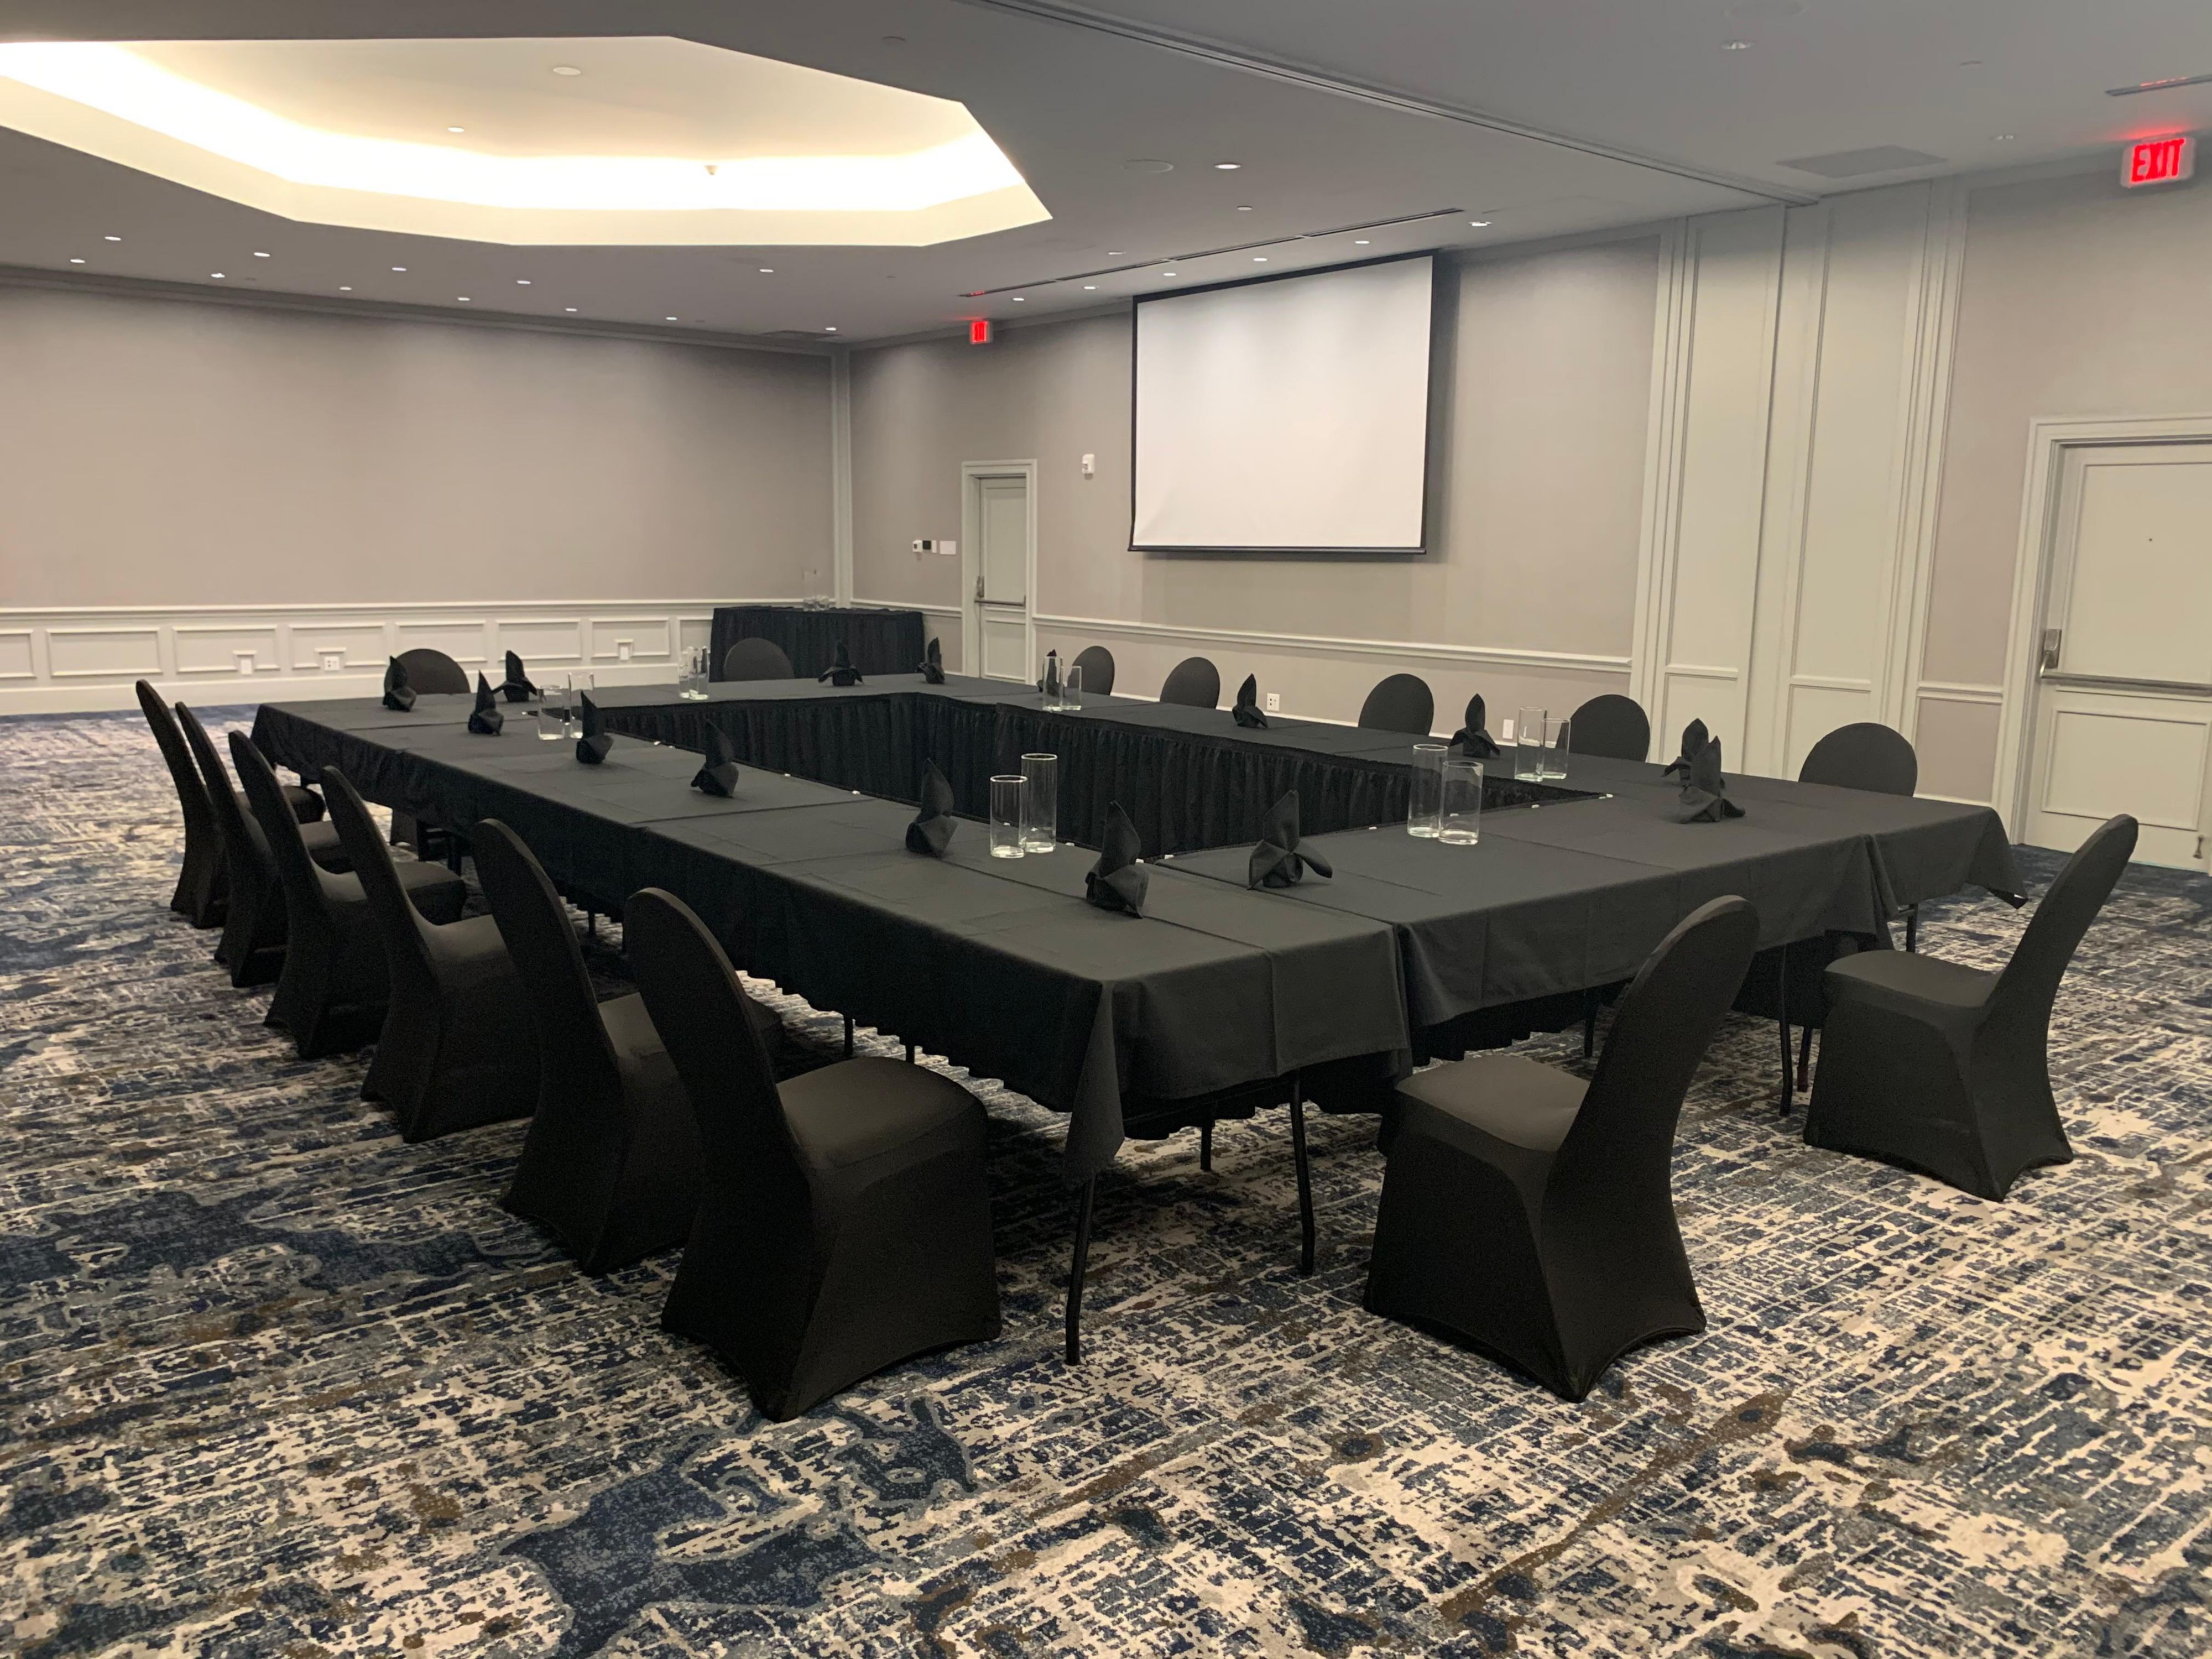 With seven meeting rooms with the capacity to hold groups of up to 200 guests, we have the flexible event space you need for your business meeting, conference, or convention. Make your meeting complete with catering from our restaurant, the Crowne Plaza® Grill & Bar.